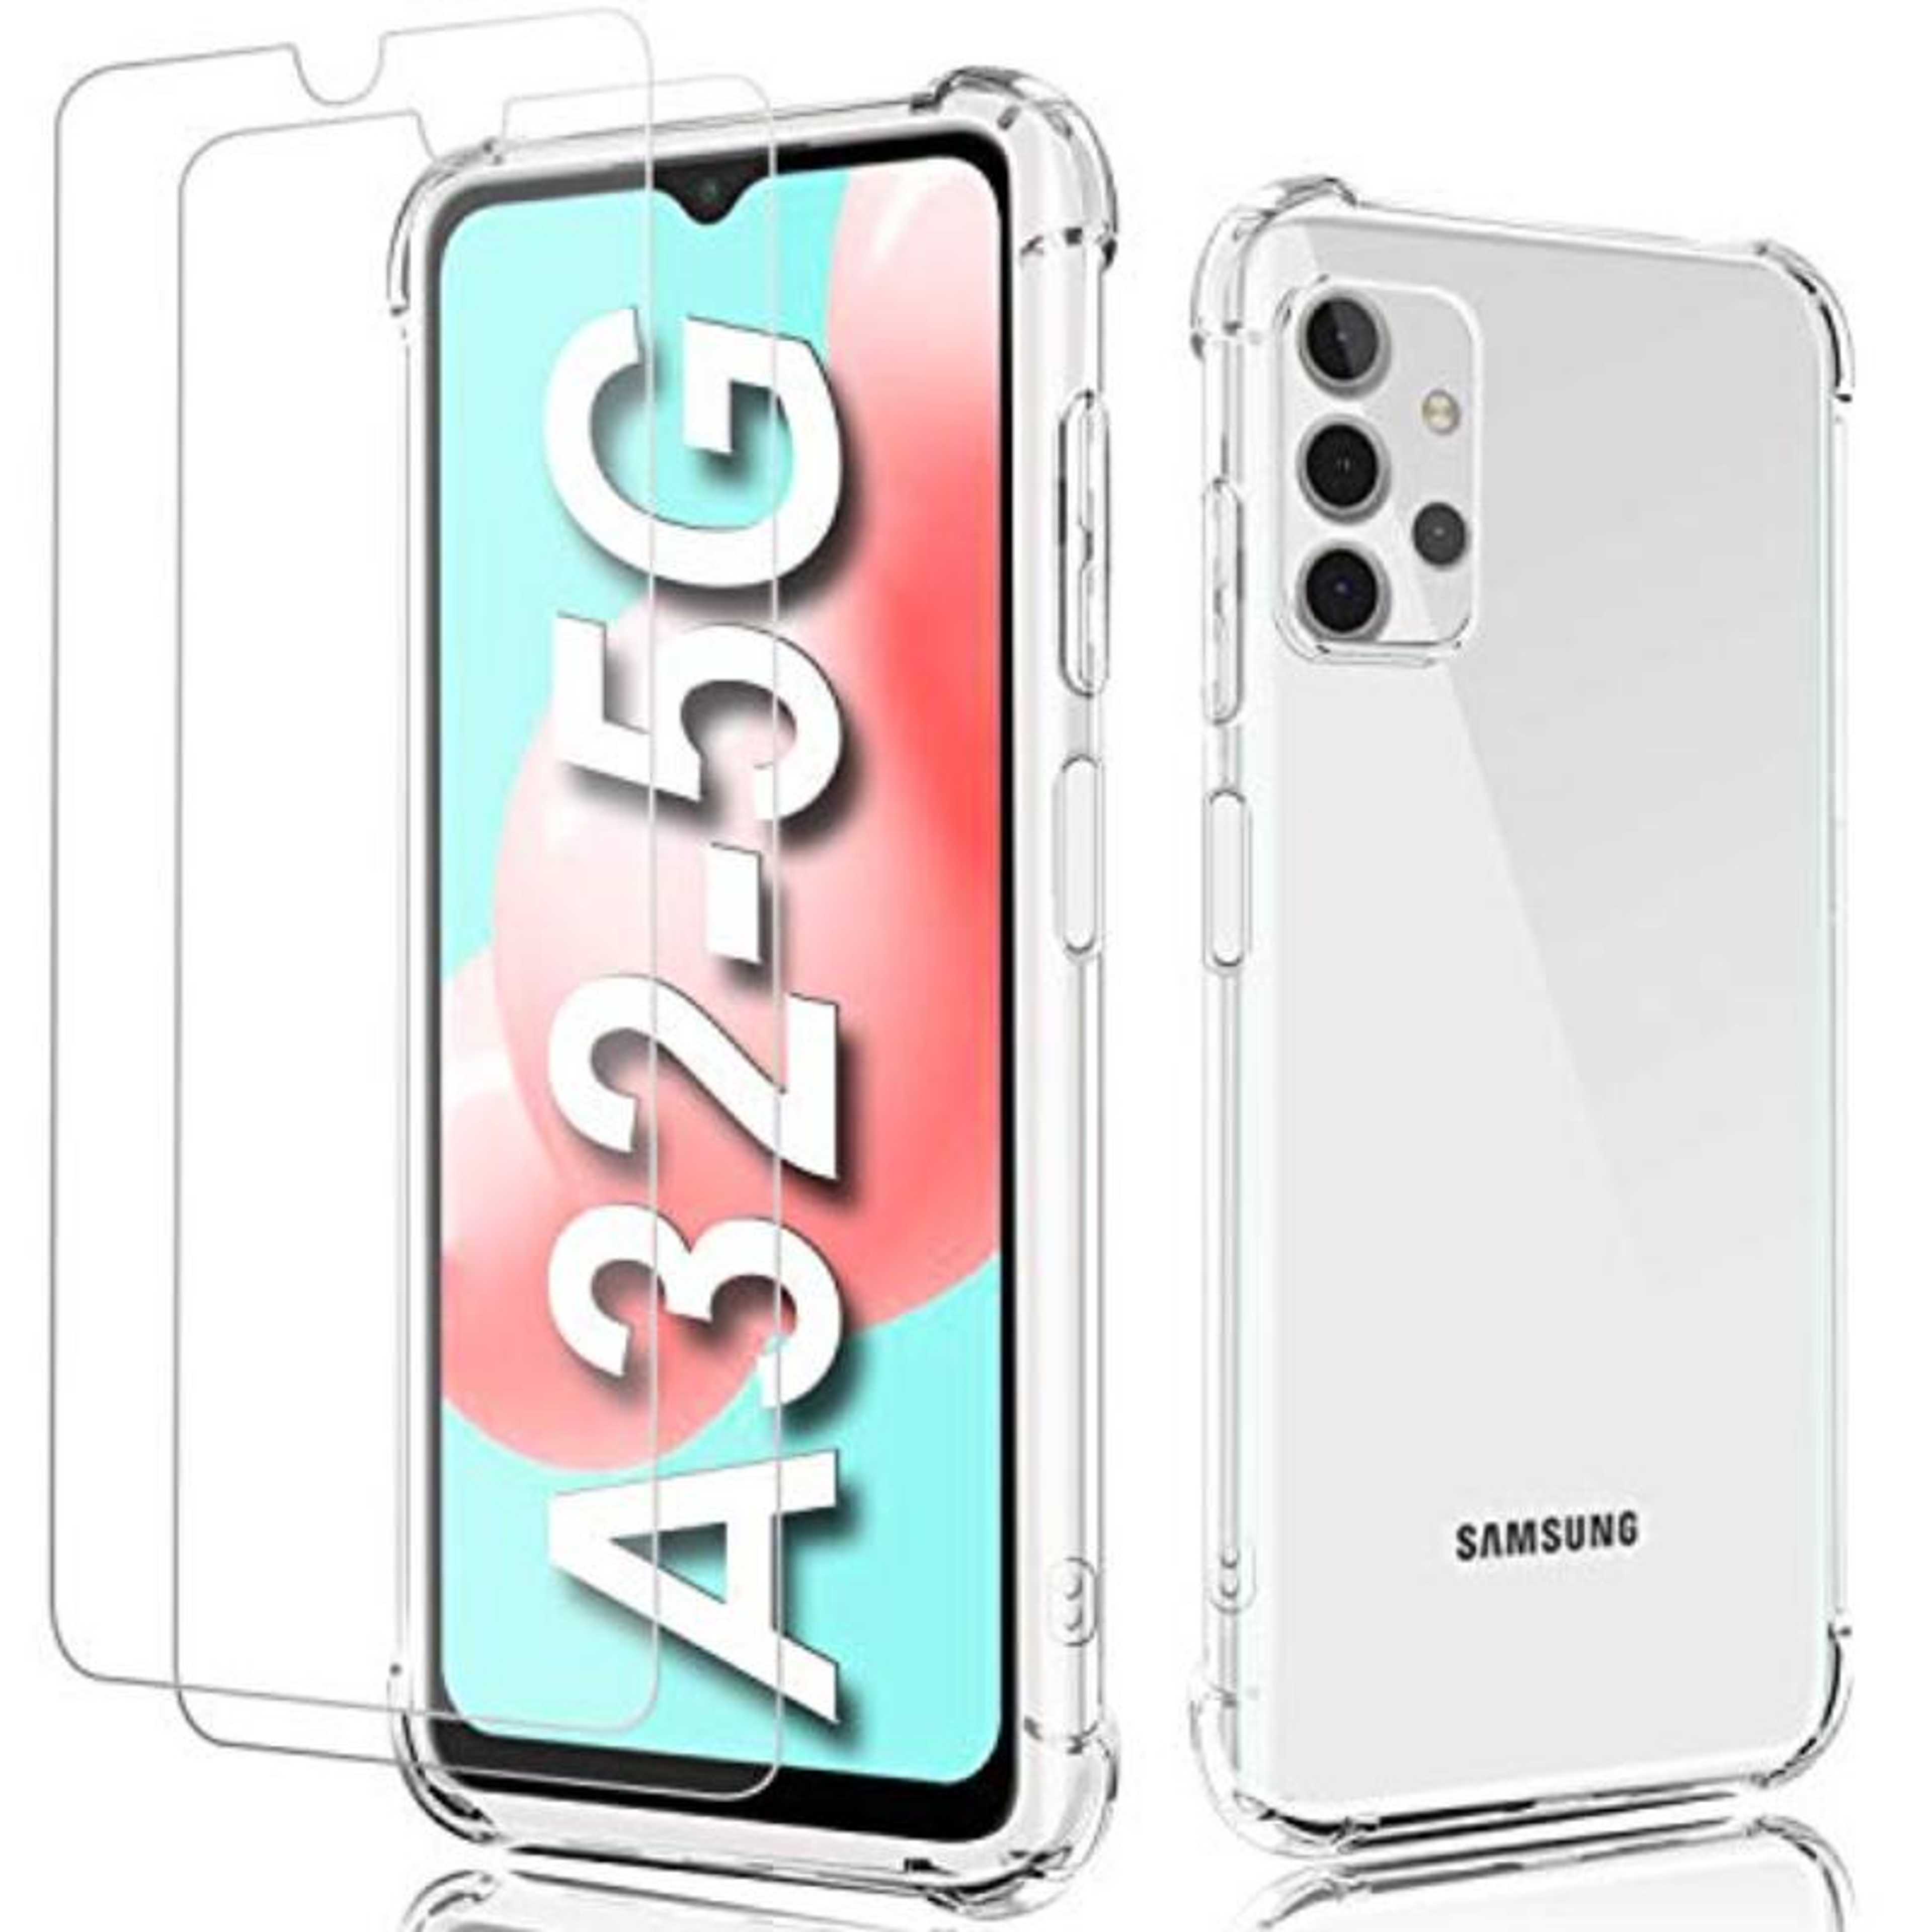 Samsung galaxy A32 -A32 5g Transparent case shockproof cover soft jelly material